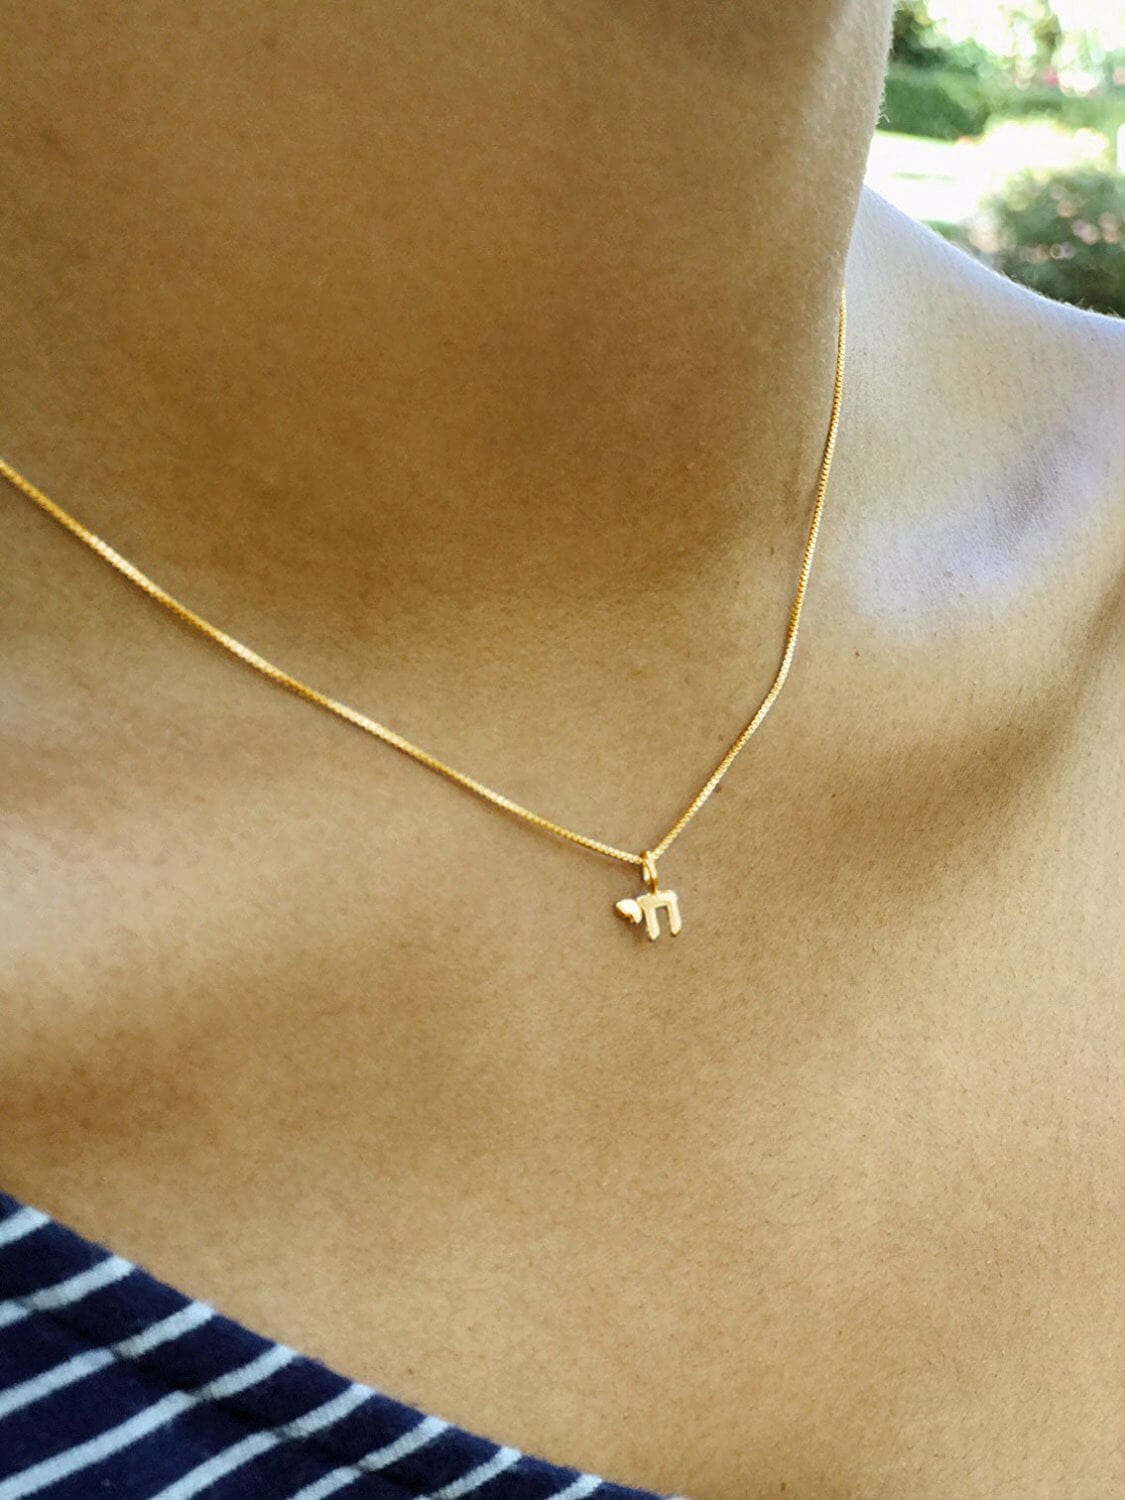 Mini Chai Necklace in 14K Yellow Gold | ModernTribe